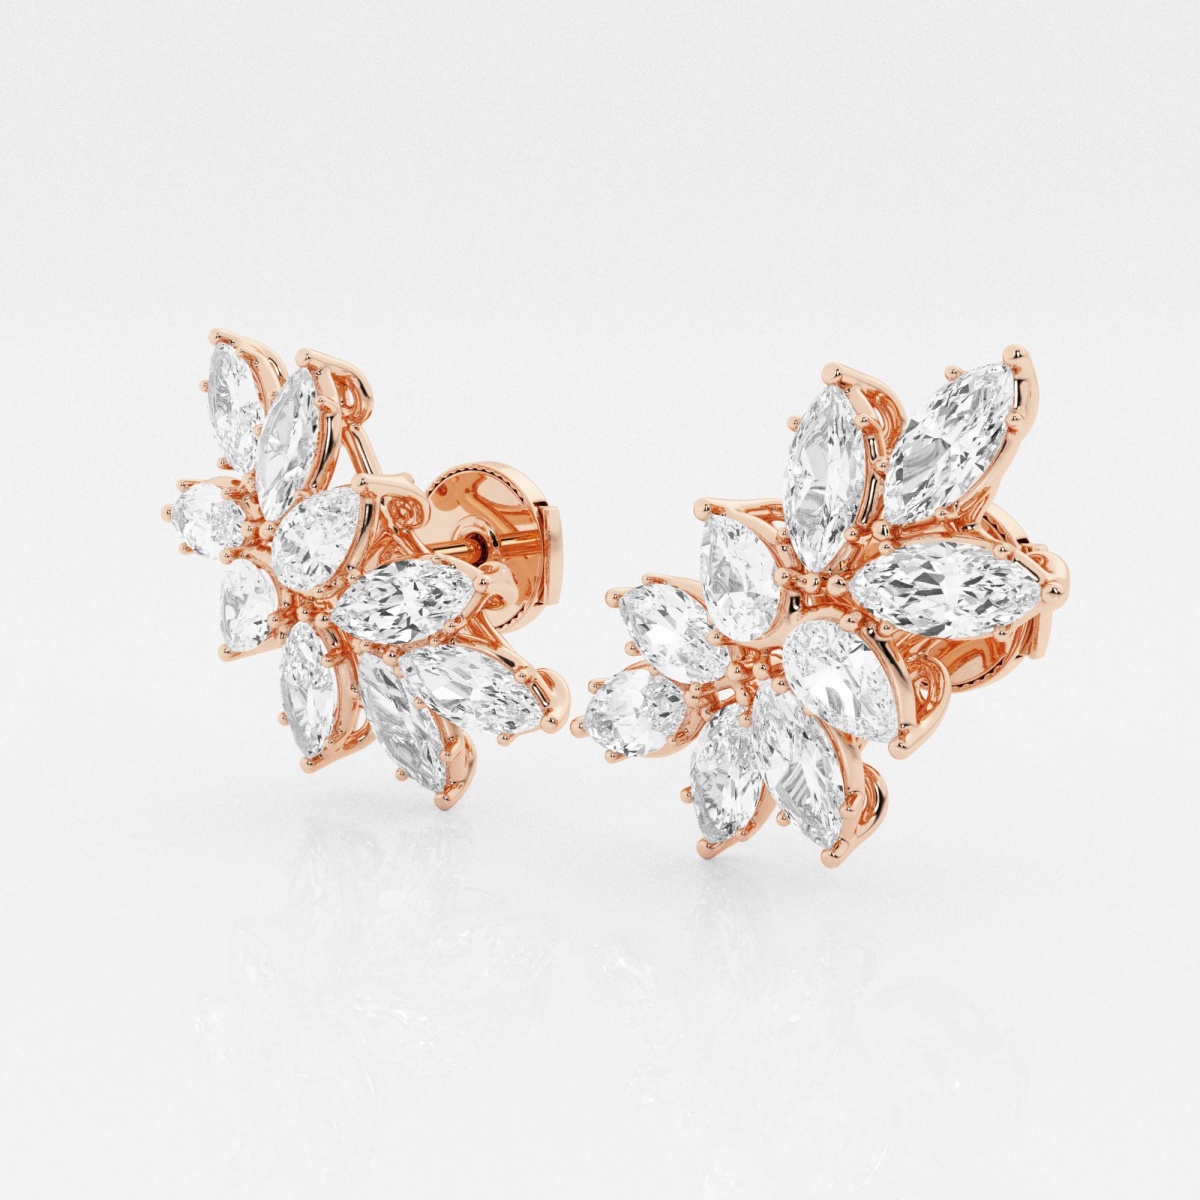 Additional Image 1 for  Badgley Mischka 4 ctw Pear & Marquise Lab Grown Diamond Cluster Fashion Earrings